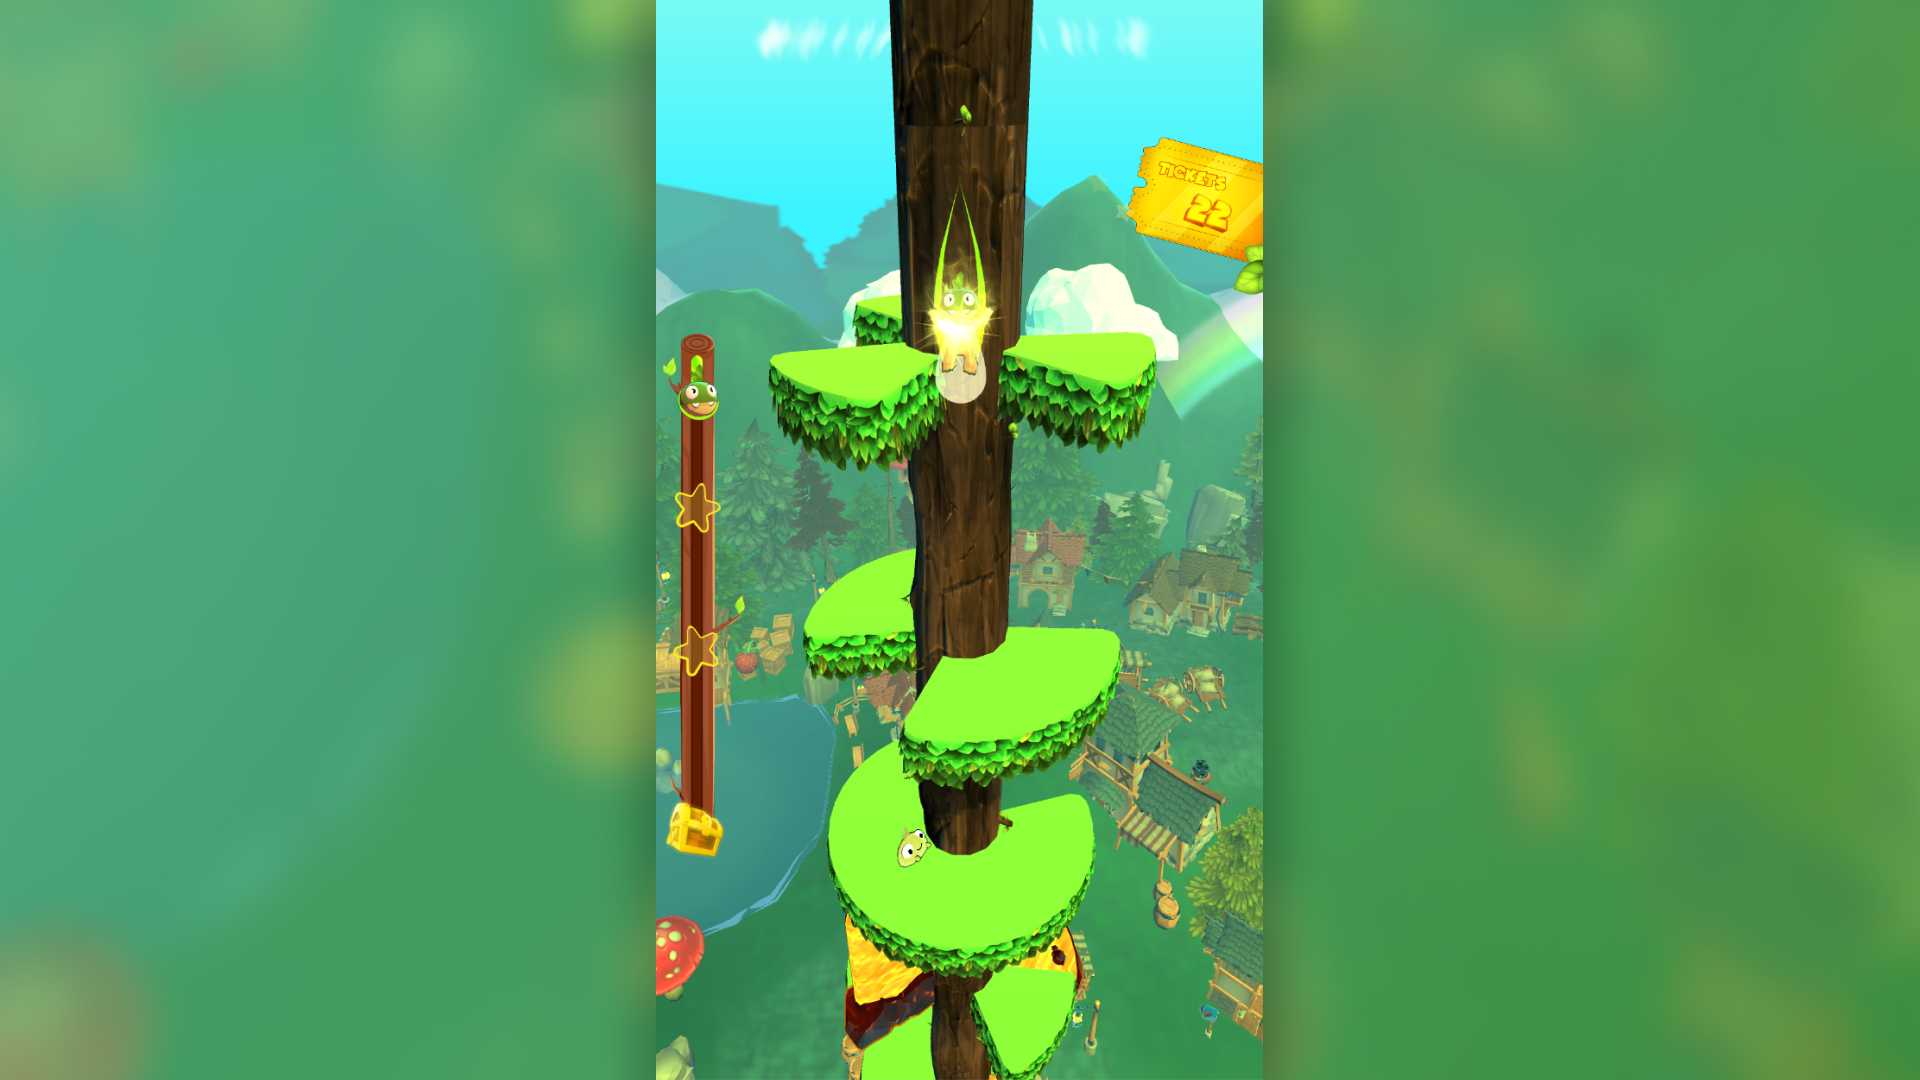 Forest Jump gameplay boost allowing the character to destroy the platforms under it